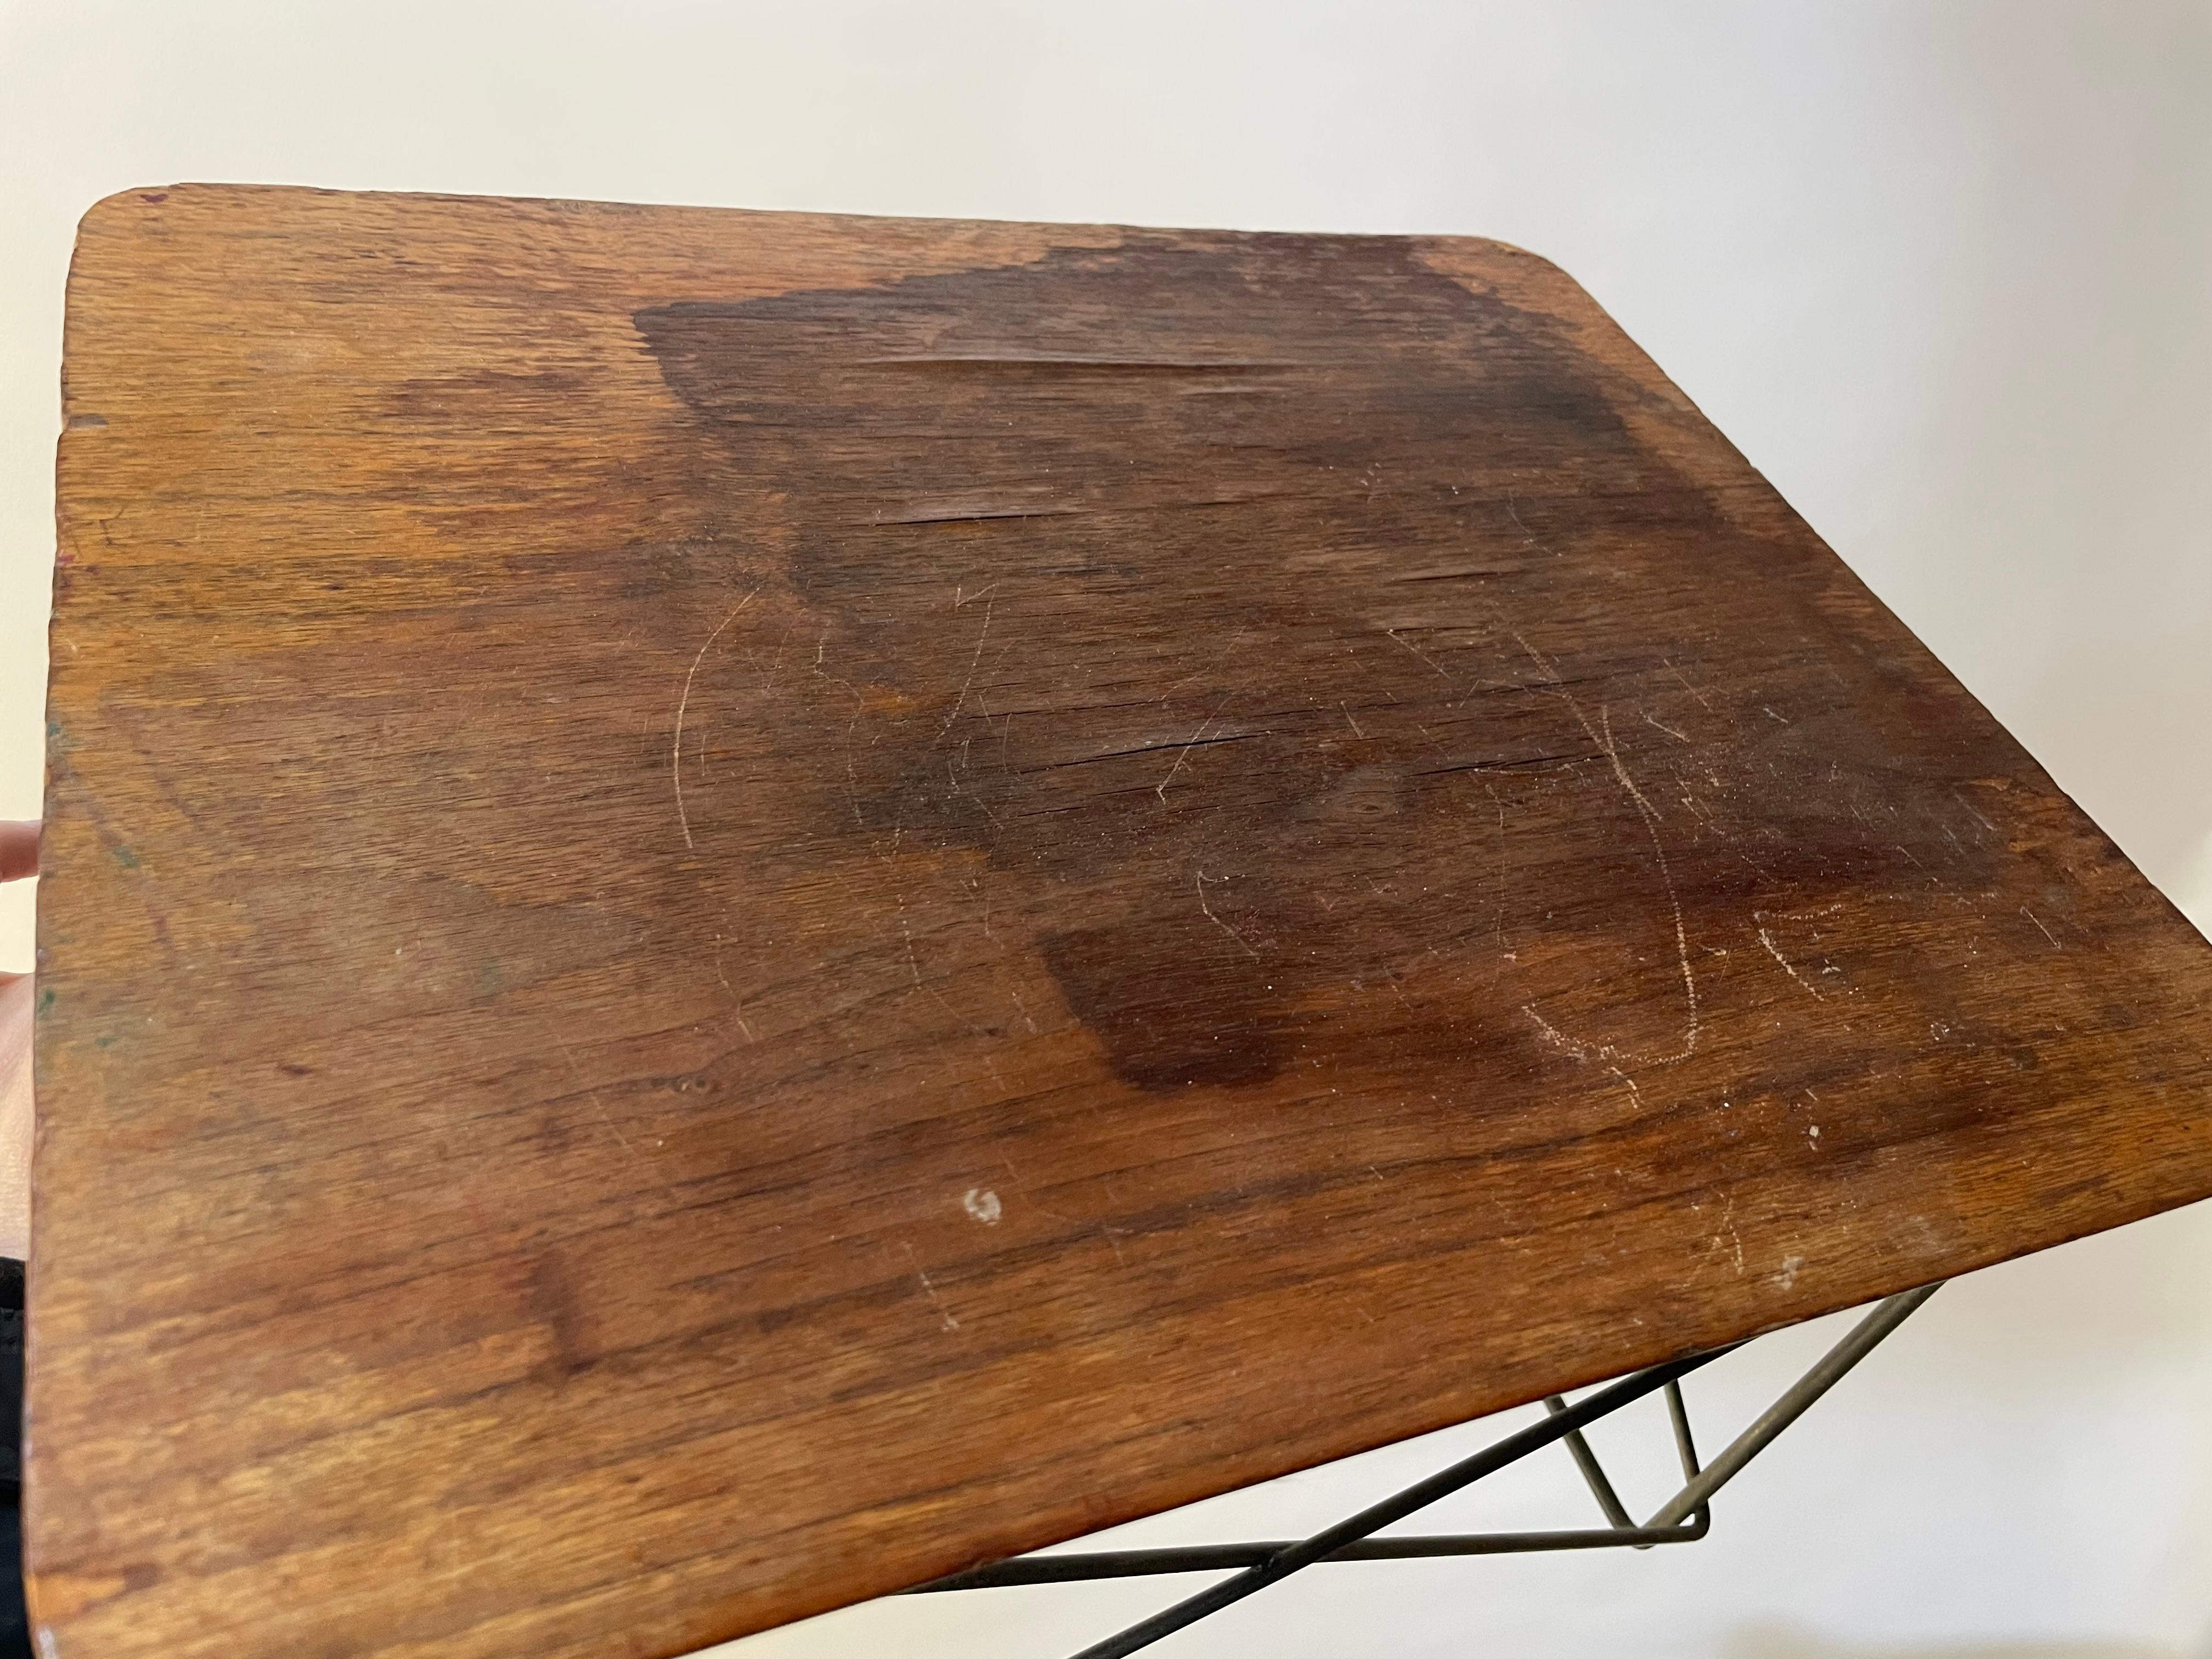 Rare example of 1st generation LTR with label intact. 

Released in 1950, the abbreviated LTR stood for the Low (L) Table (T) with Rod base (R). 

Following the success of the plywood group in the latter half of the 1940's, the Eames LTR side table